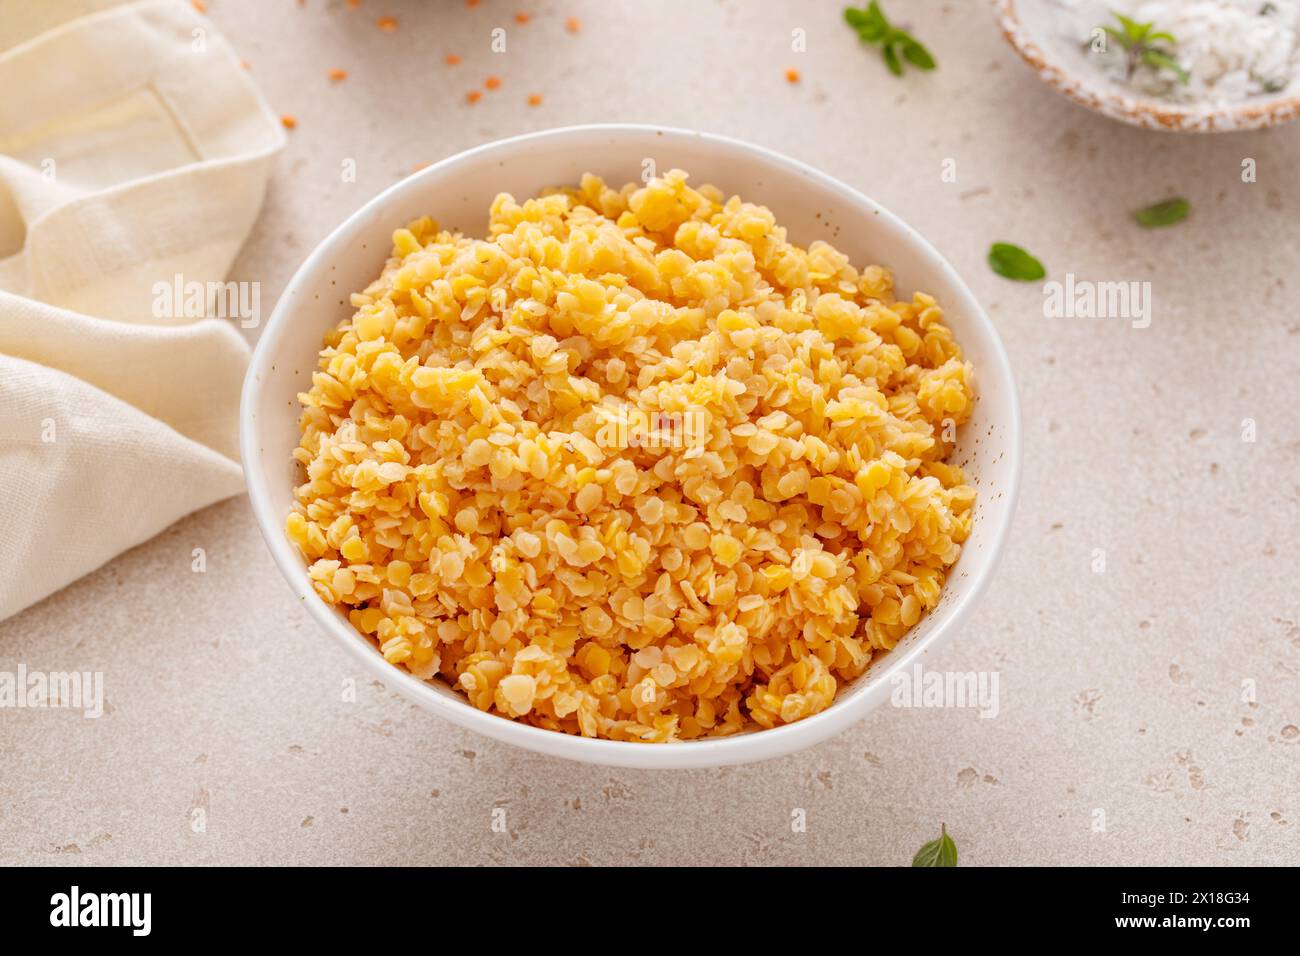 Cooked red lentils in a bowl, healthy vegan protein source, meat alternative Stock Photo